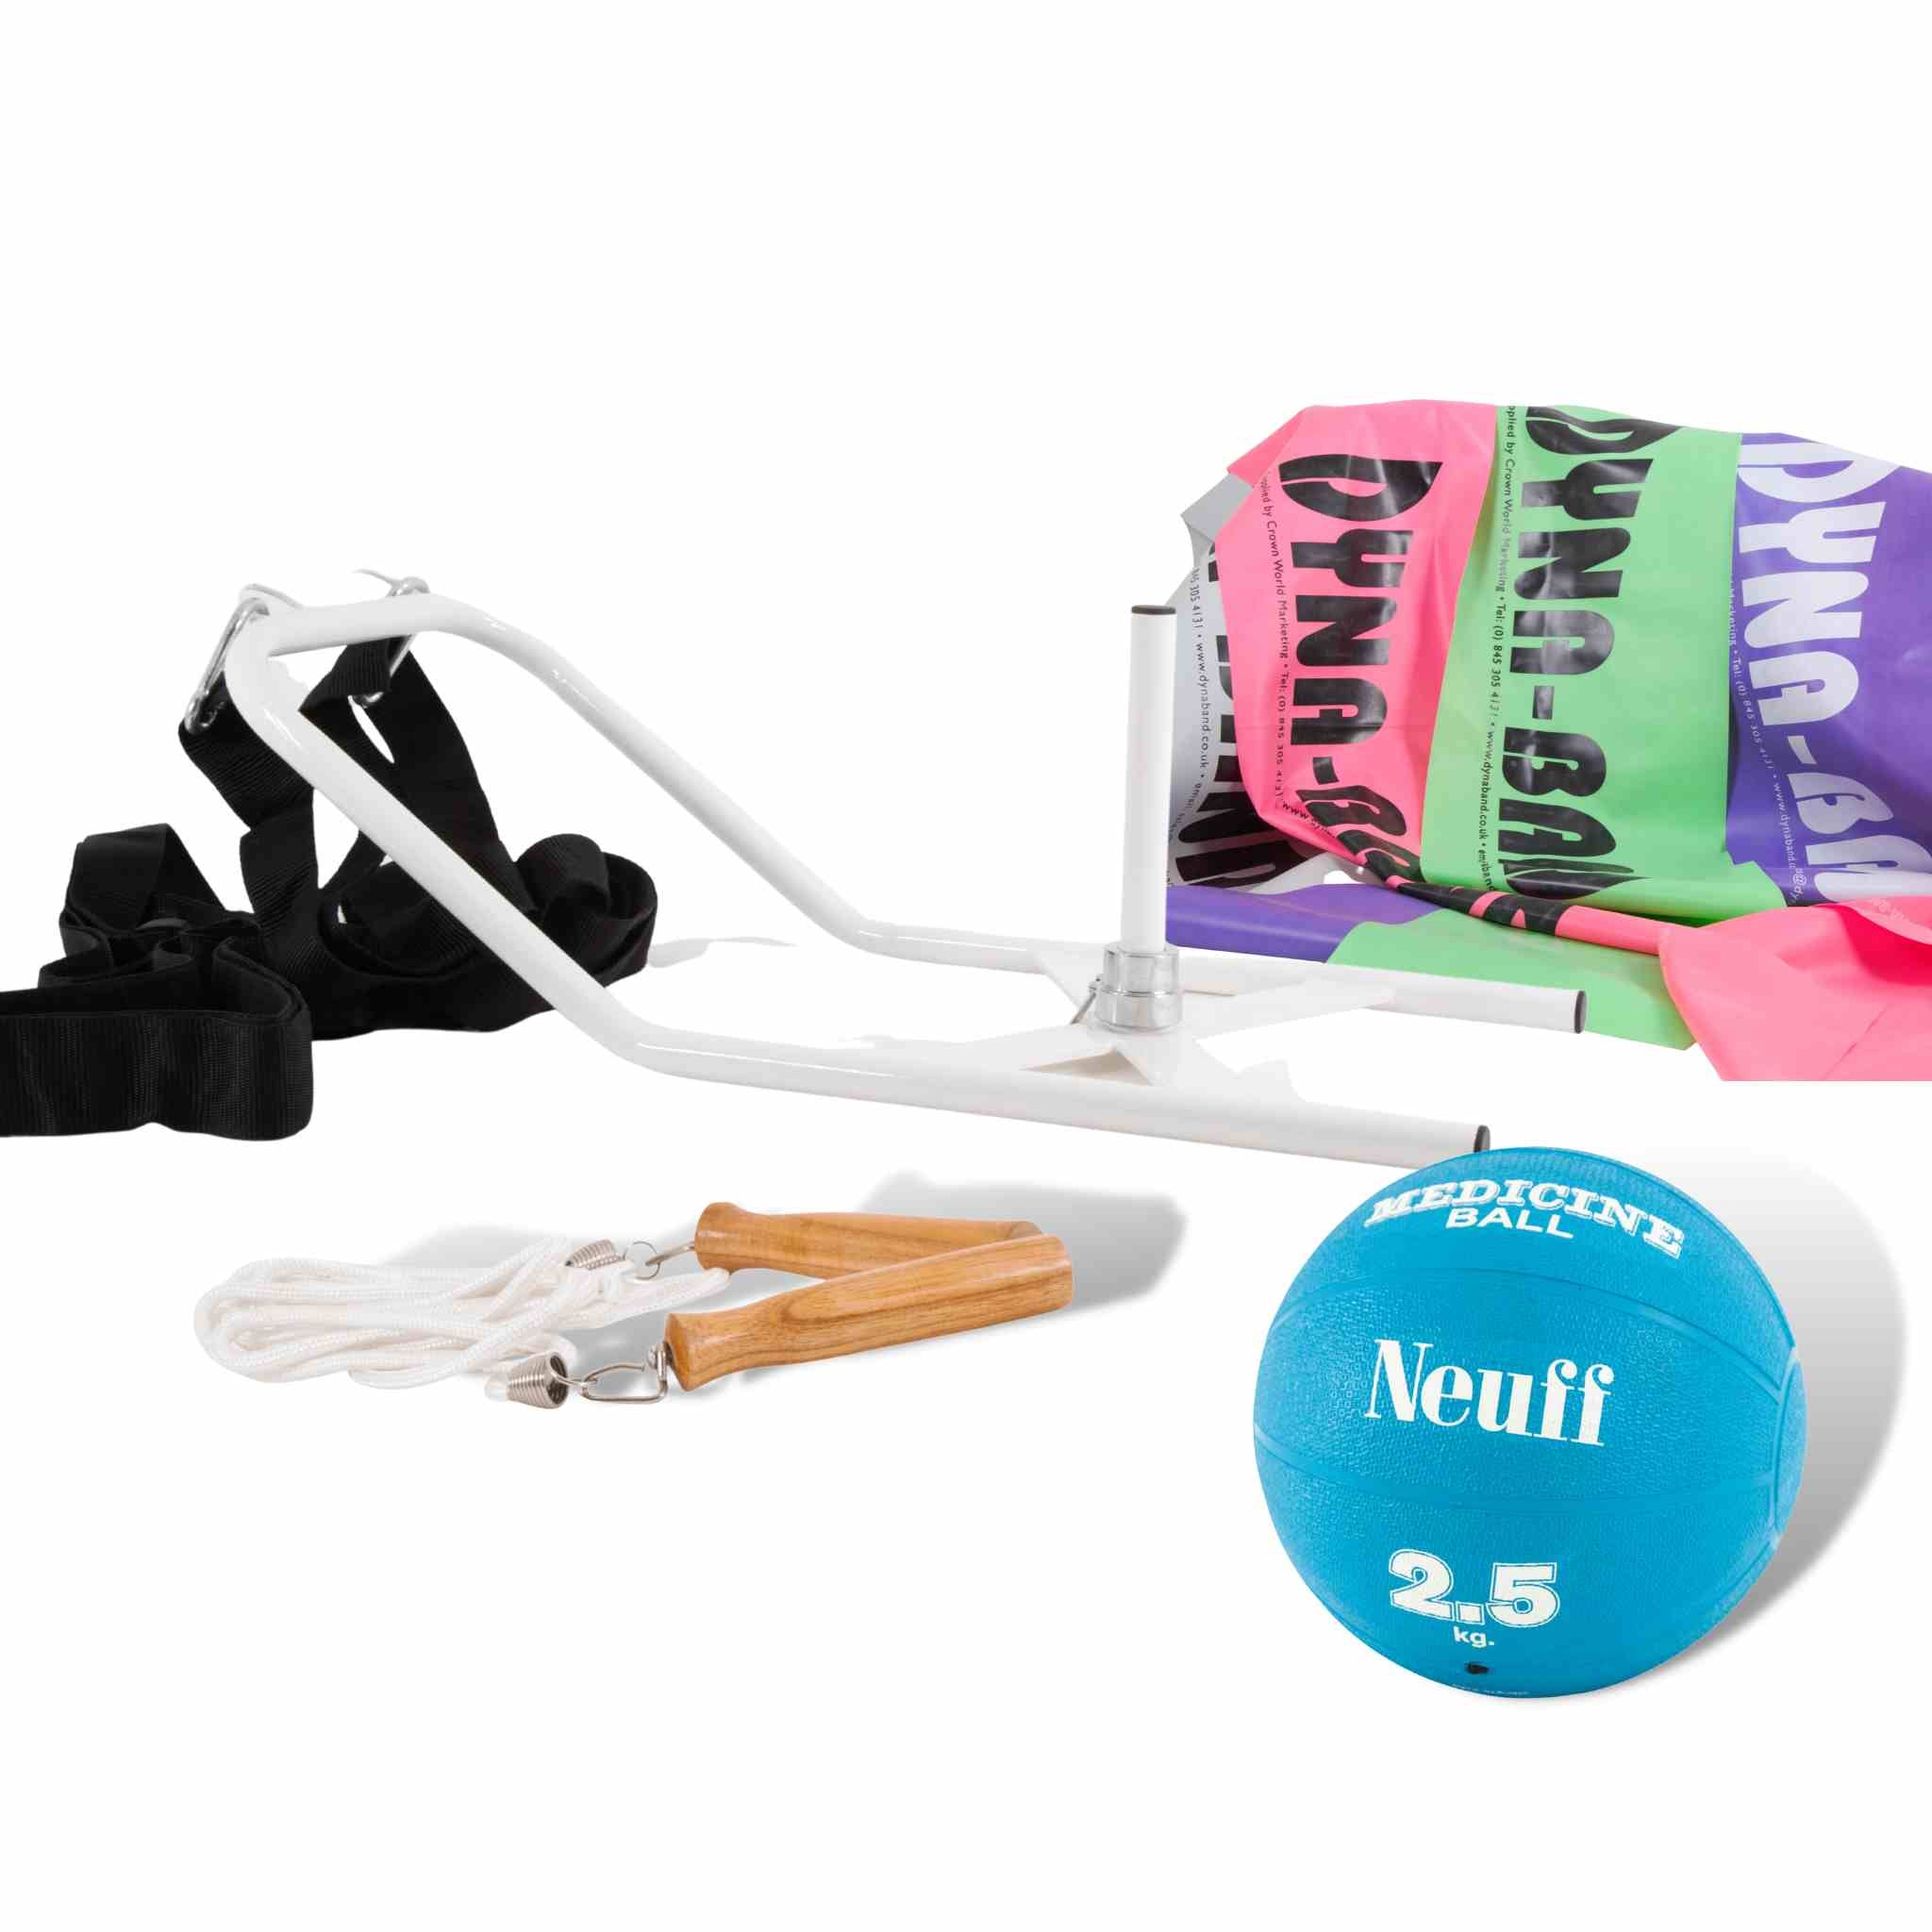 Sprint Training Equipment | Power Pack 3 | Resistance Sled, Dynabands, Skipping Rope and 2.5kg Medicine Ball 